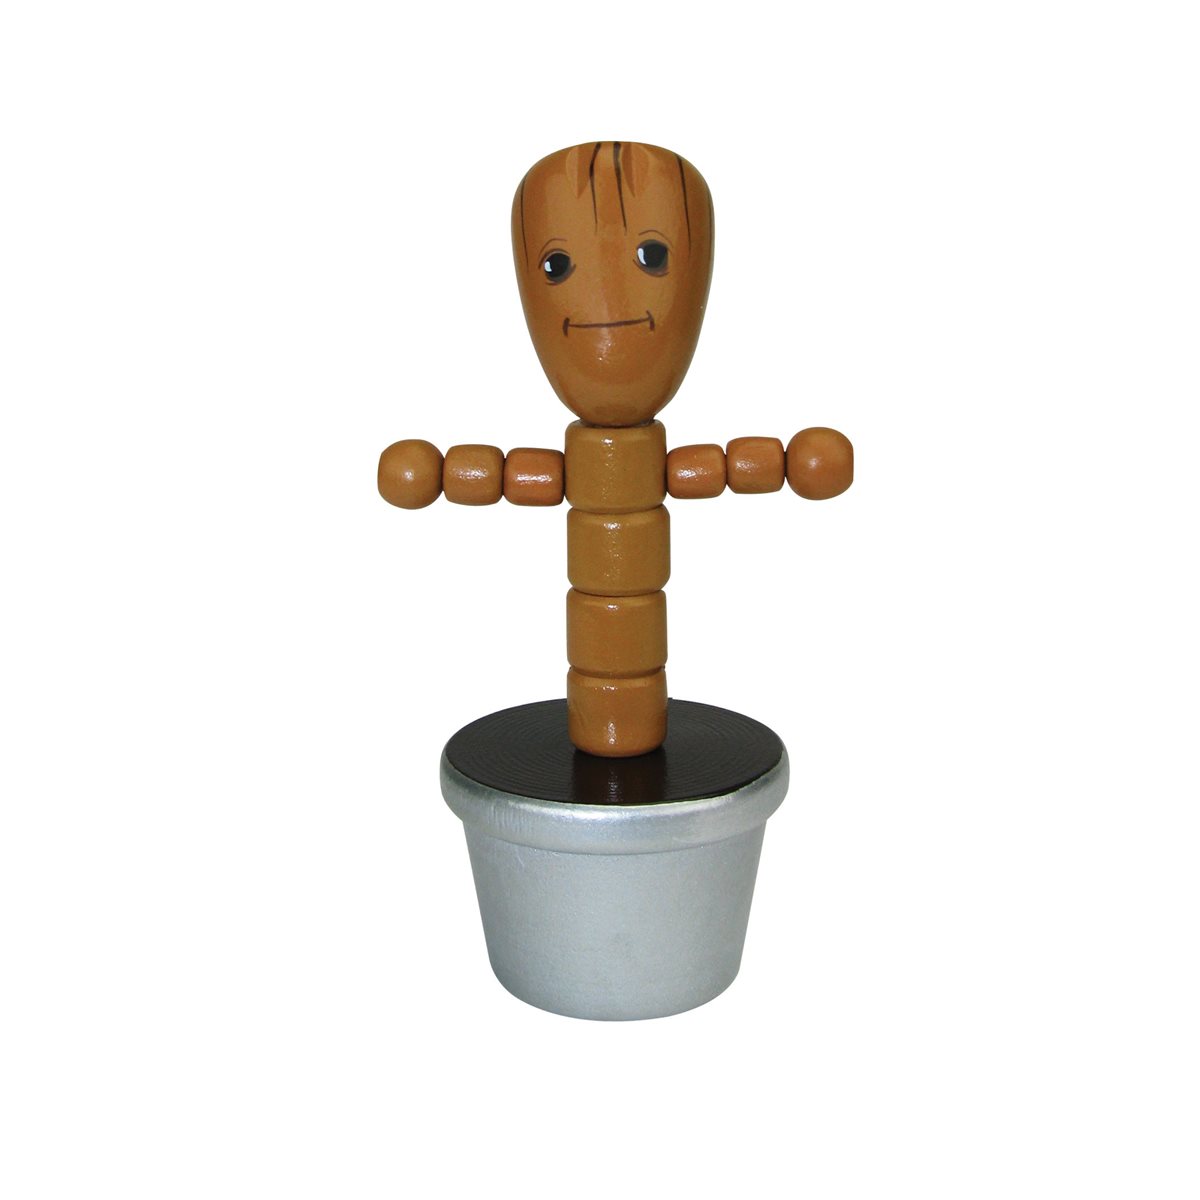 Metals Guardians of the Galaxy 4" Potted Groot Die-Cast Collectable Figurine 